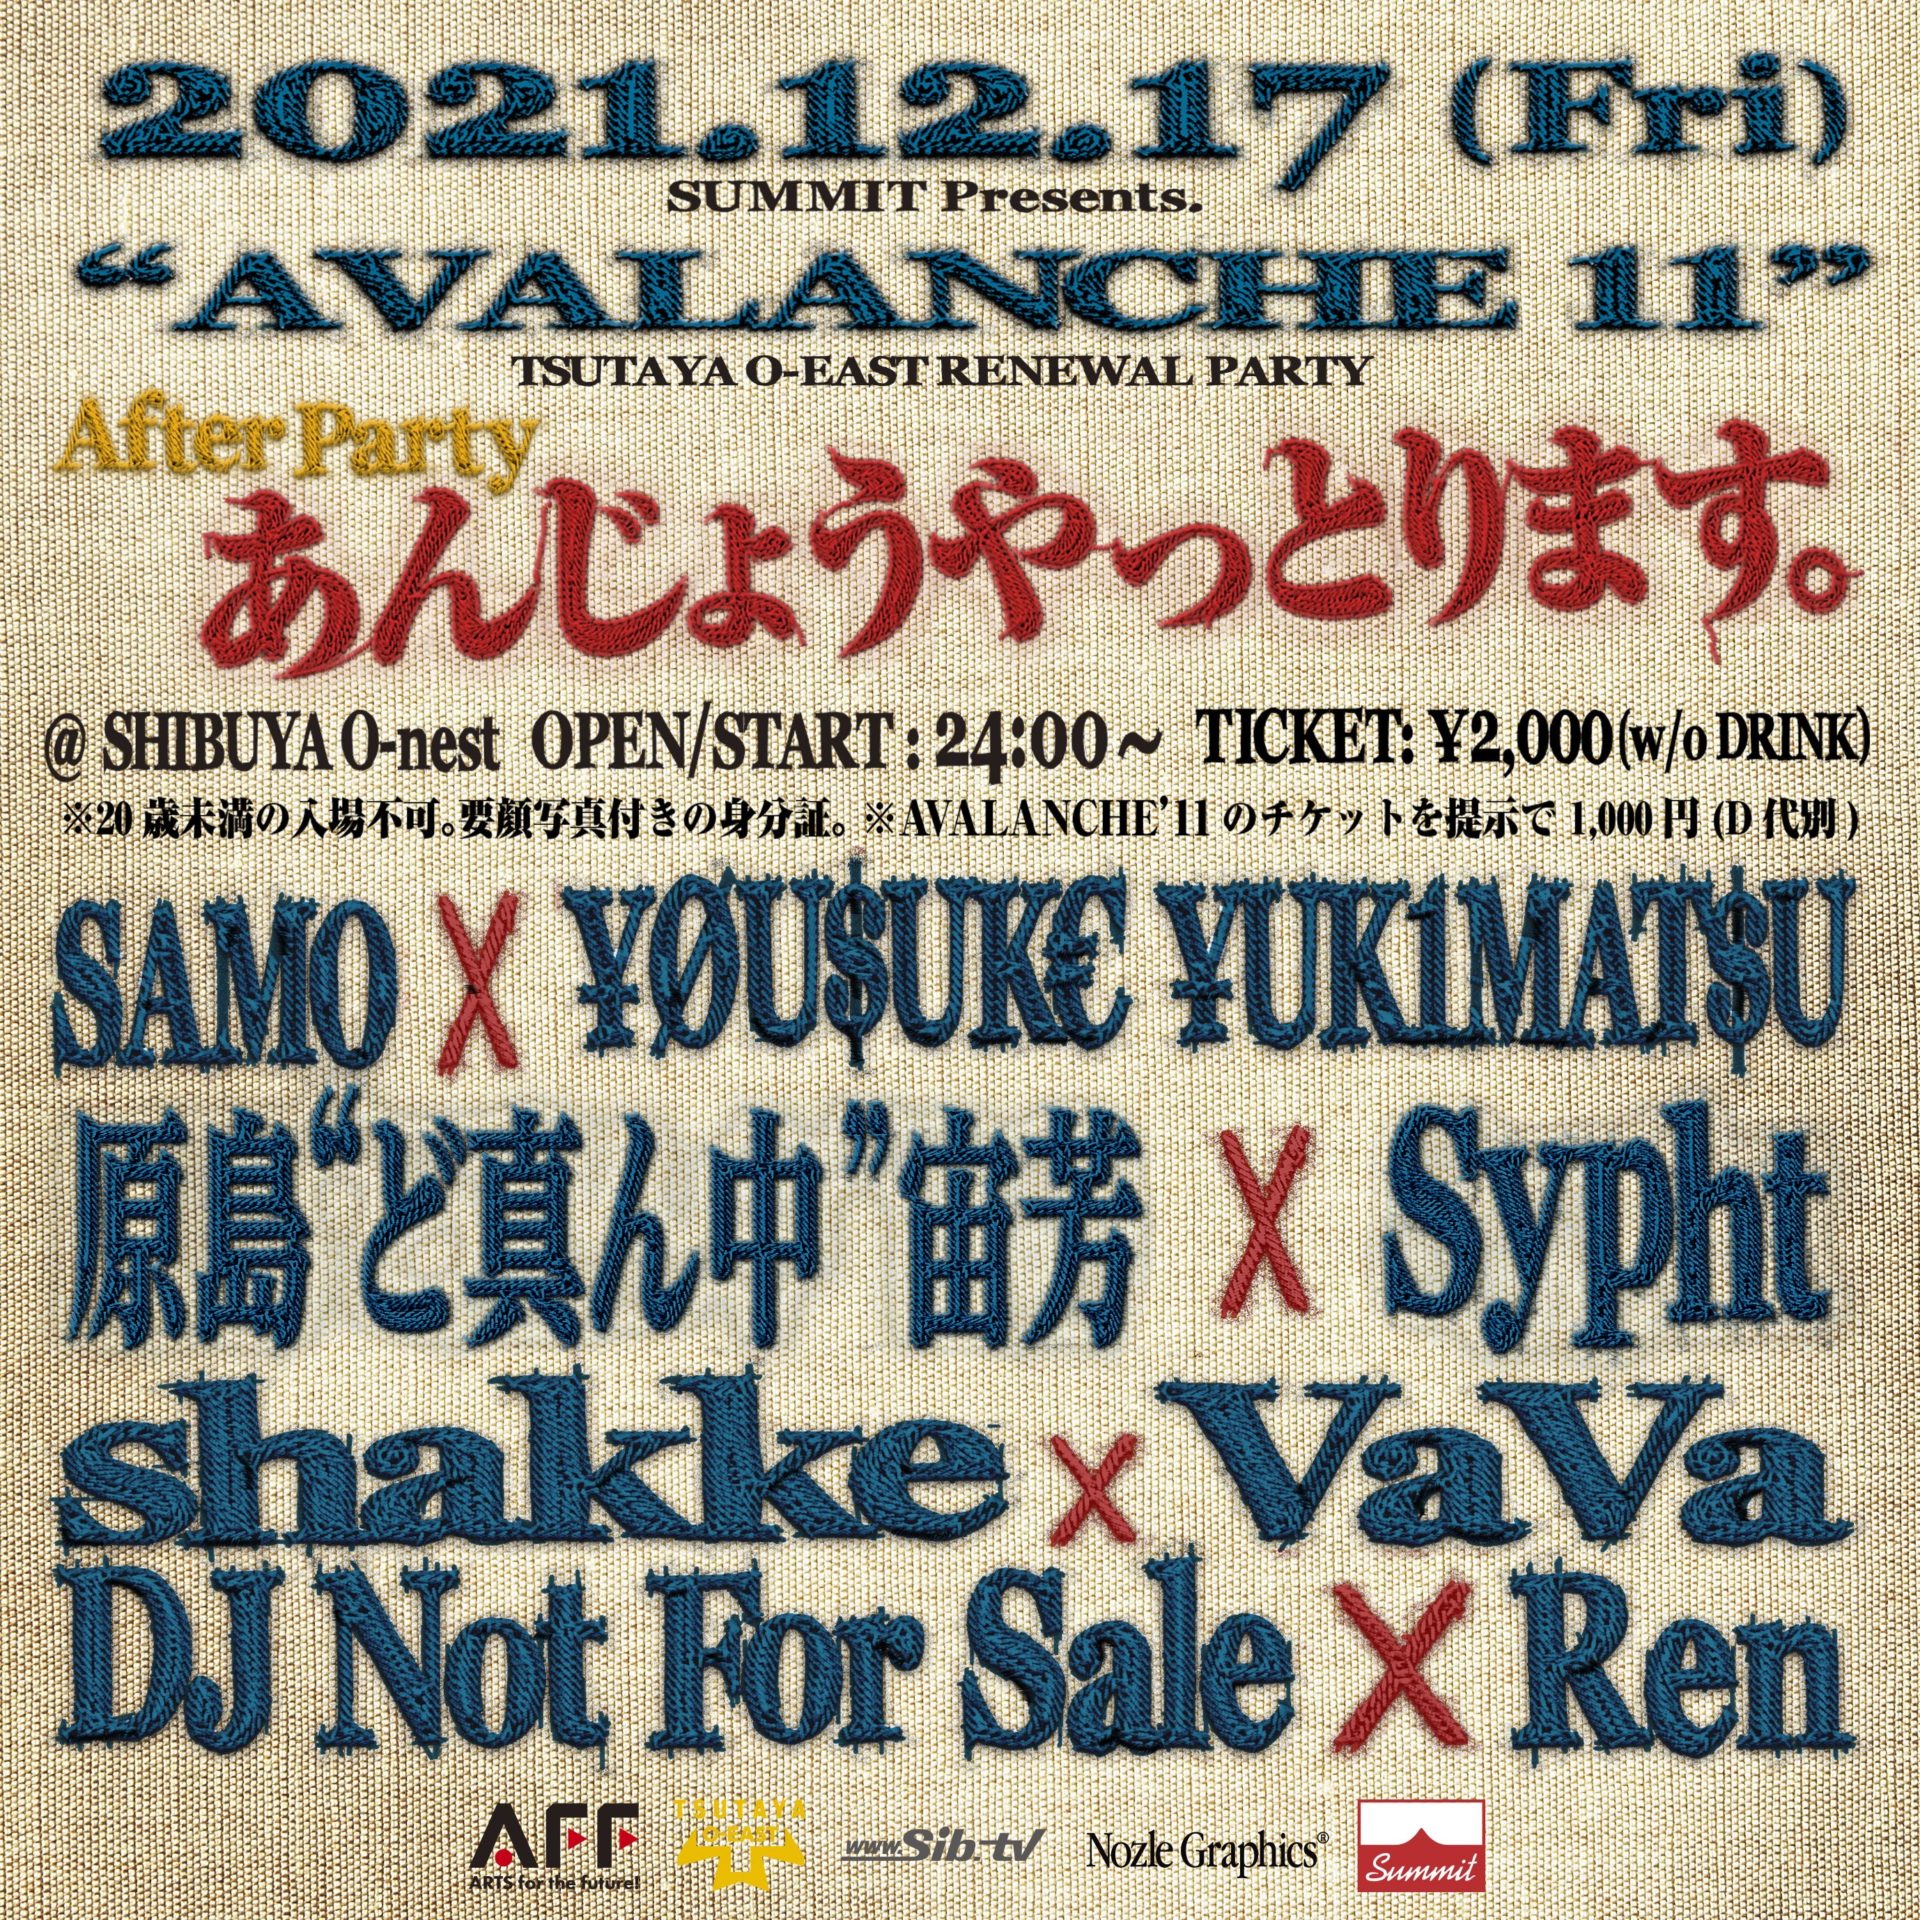 SUMMIT presents AVALANCHE’11 – O-EAST RENEWAL PARTY – after party “あんじょうやっとります。”